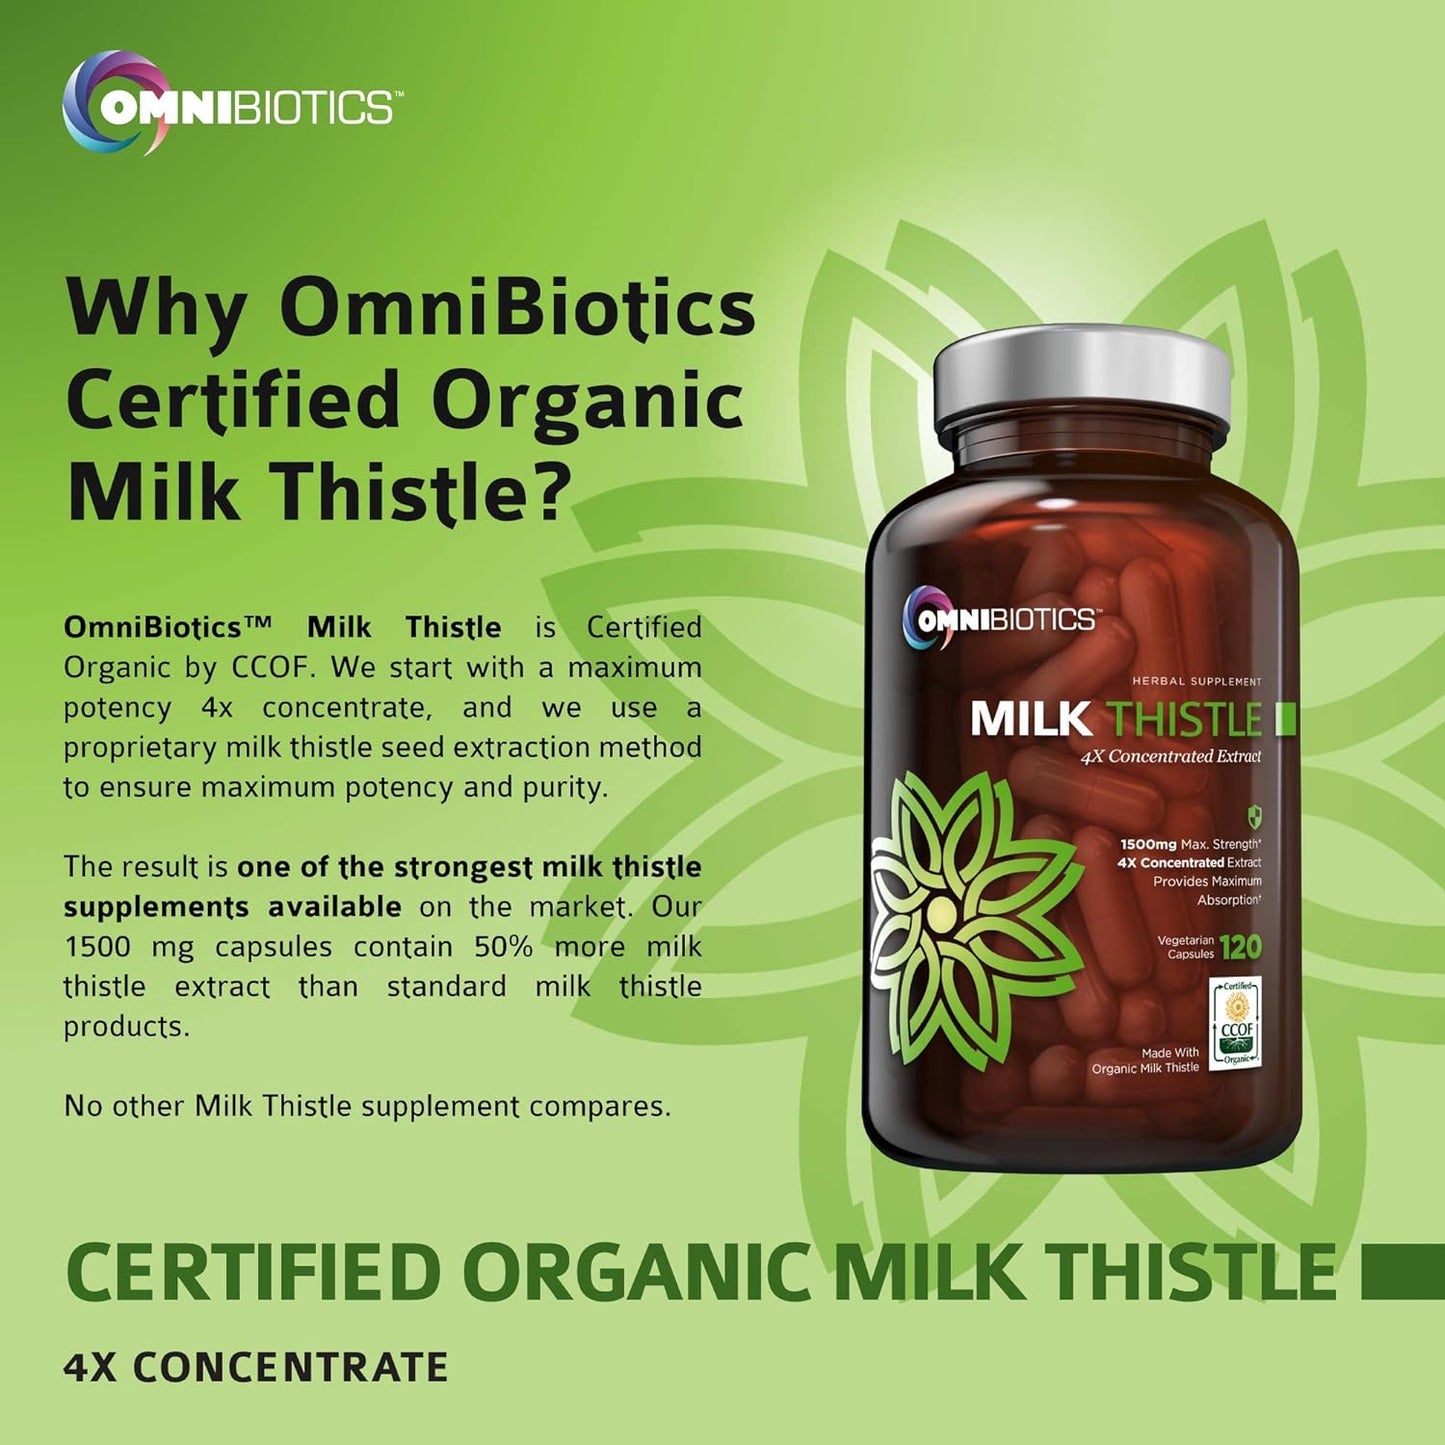 Organic Milk Thistle Capsules, 1500Mg 4X Concentrated Extract with Silymarin Is the Strongest Milk Thistle Supplement Available. Great for Liver Cleanse! 120 Vegetarian Capsules